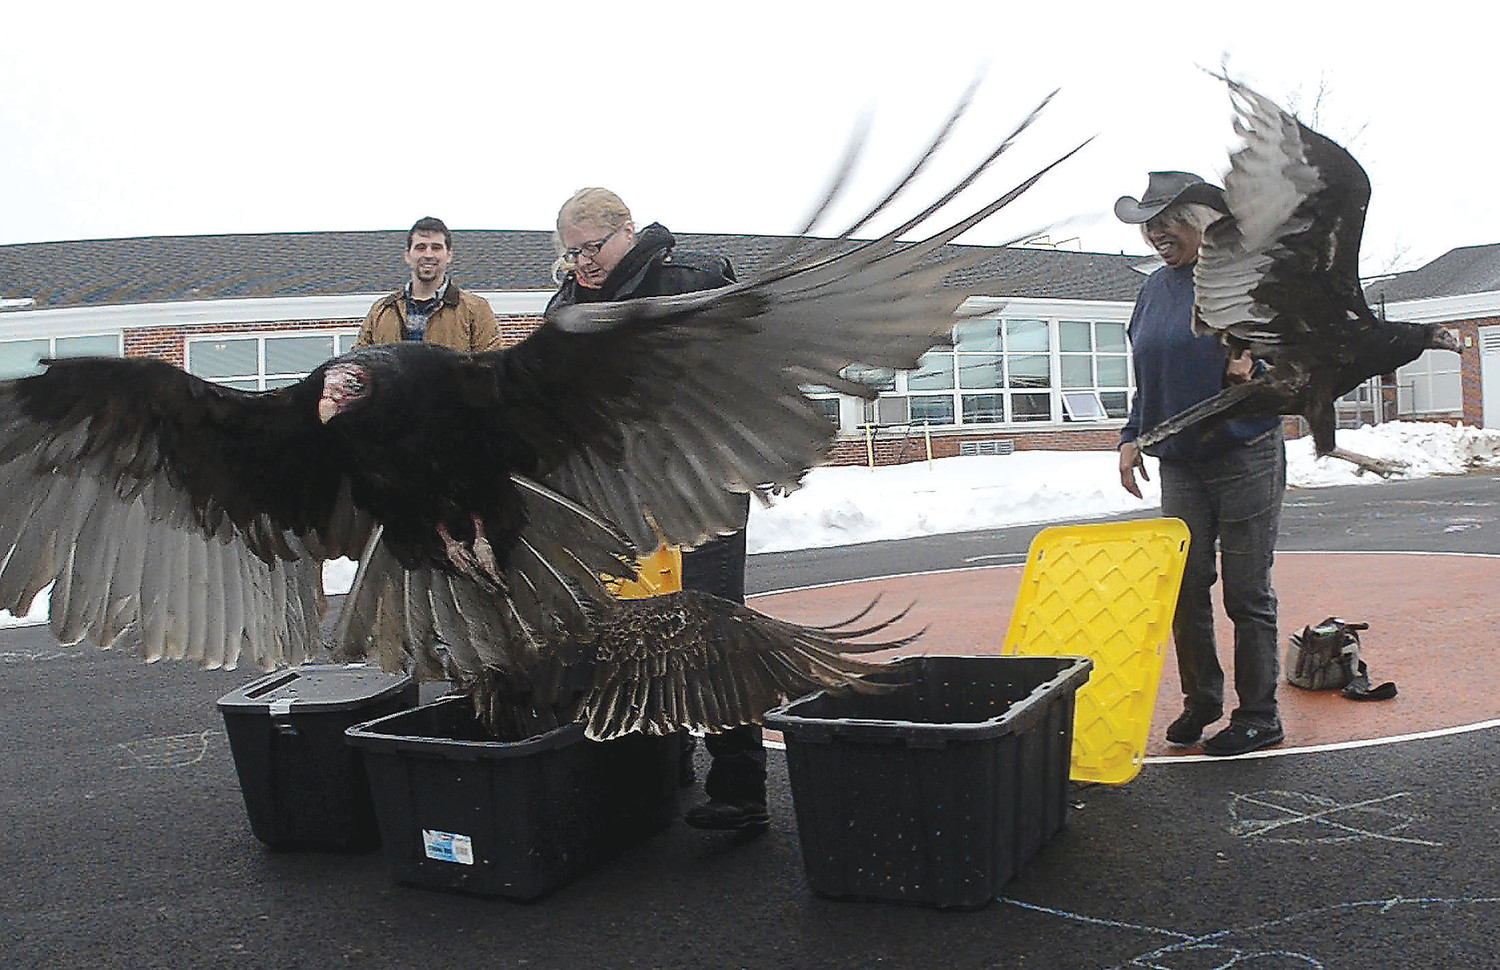 Zak Mertz, director of Cape Wildlife center, Olivia Legrow, of Mass Raptor center, and Marla Isaac, director of Mass Raptor Center, release five turkey vultures while Alice A. Macomber School children look out their windows on Thursday morning.